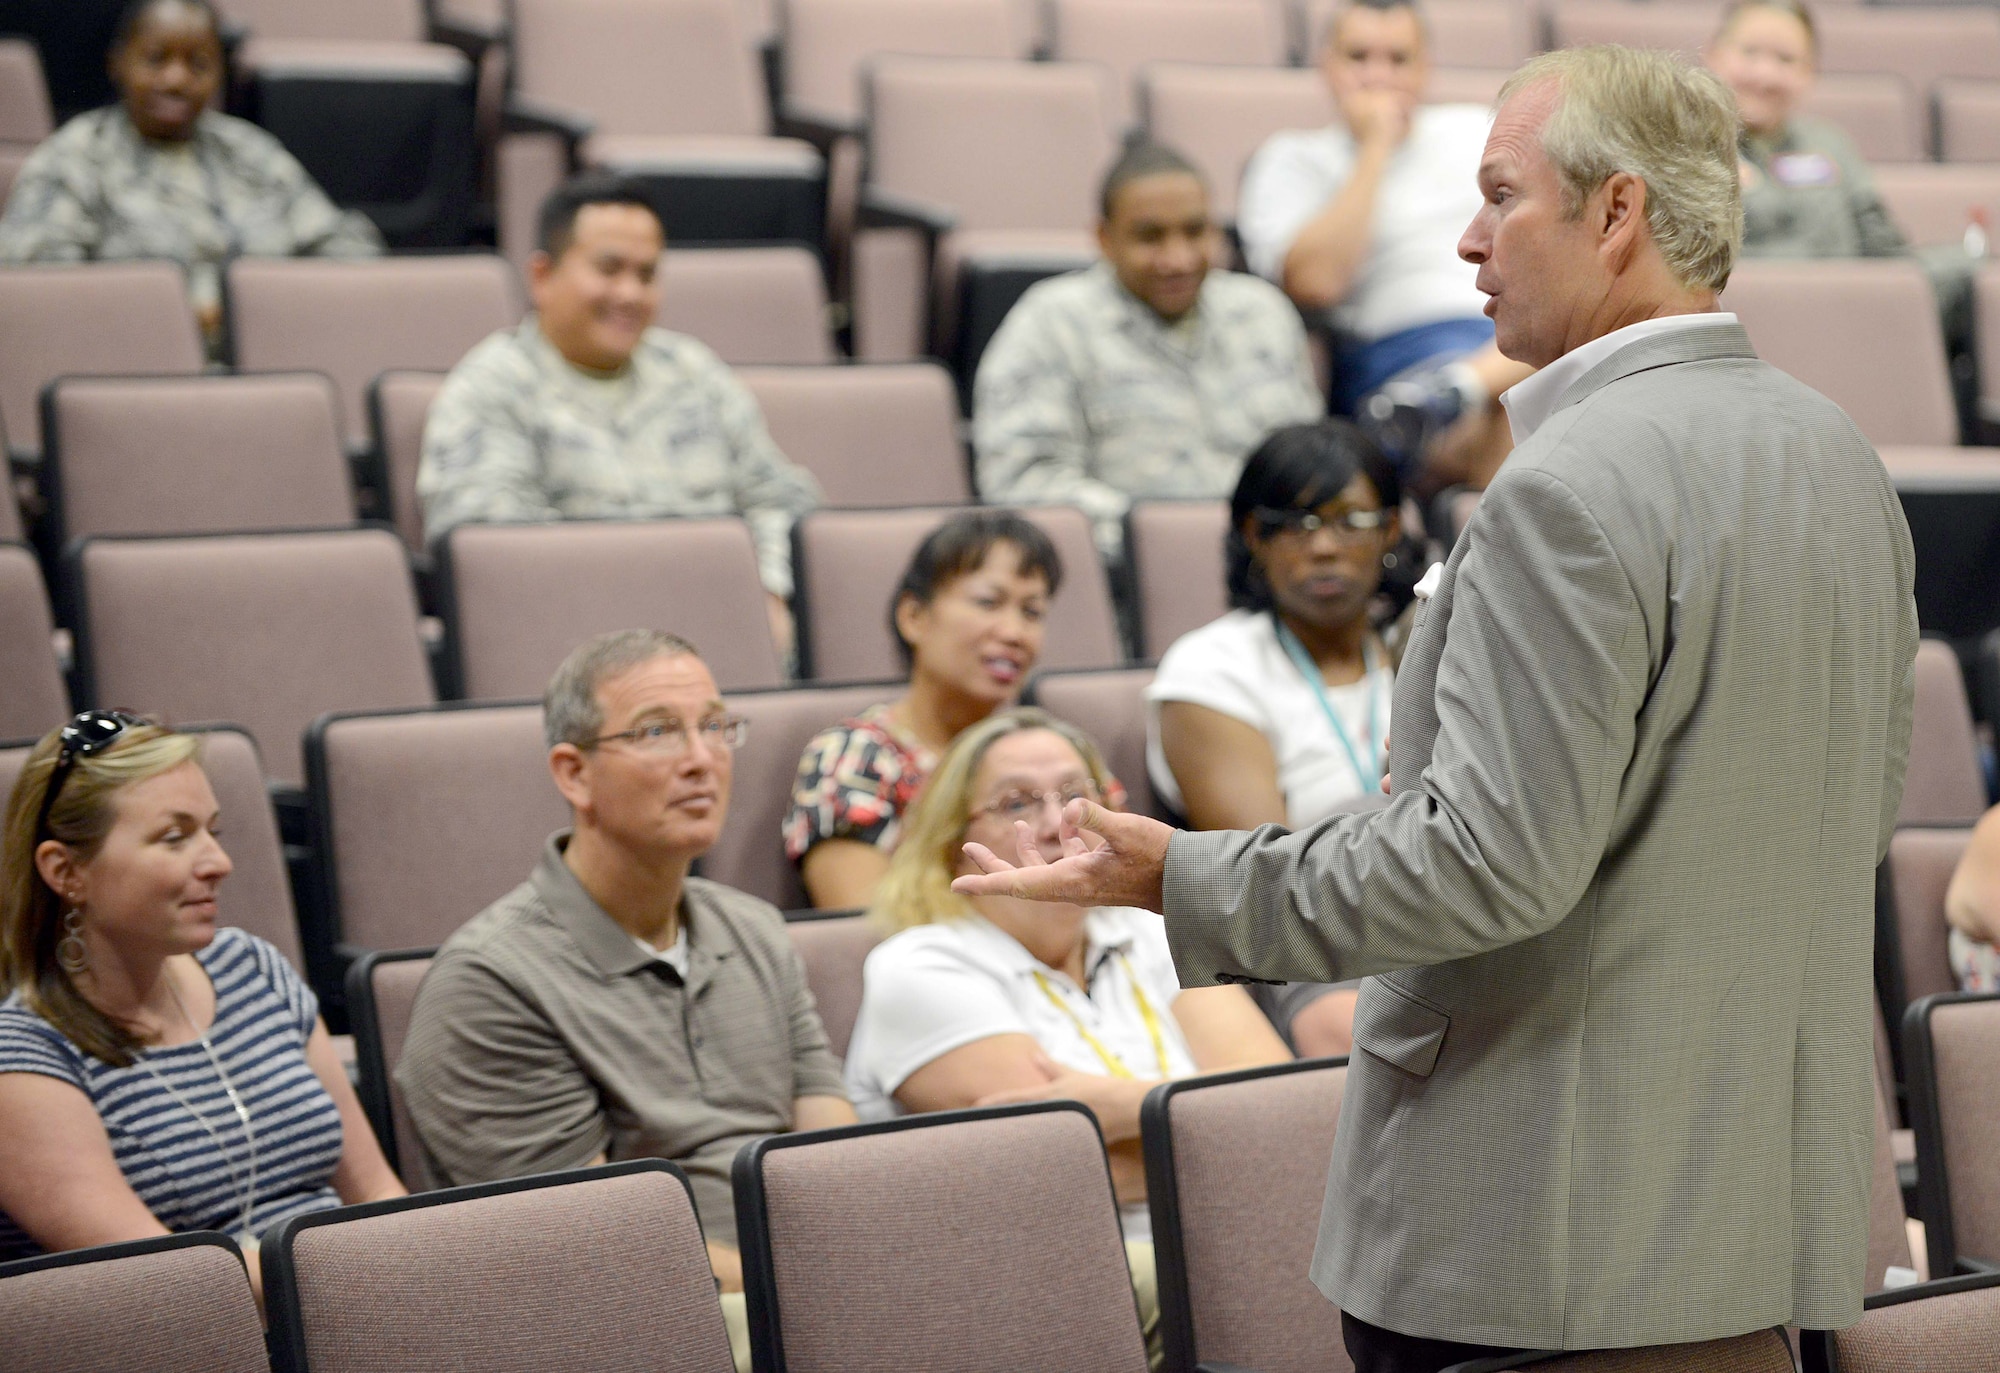 Dan Clark, world-renowned motivational speaker and New York Times best-selling author of “Chicken Soup for the Soul” and “The Art of Signifi-cance,” speaks at one of three sessions in the Base Theater July 14. (U.S. Air Force photo by Tommie Horton)